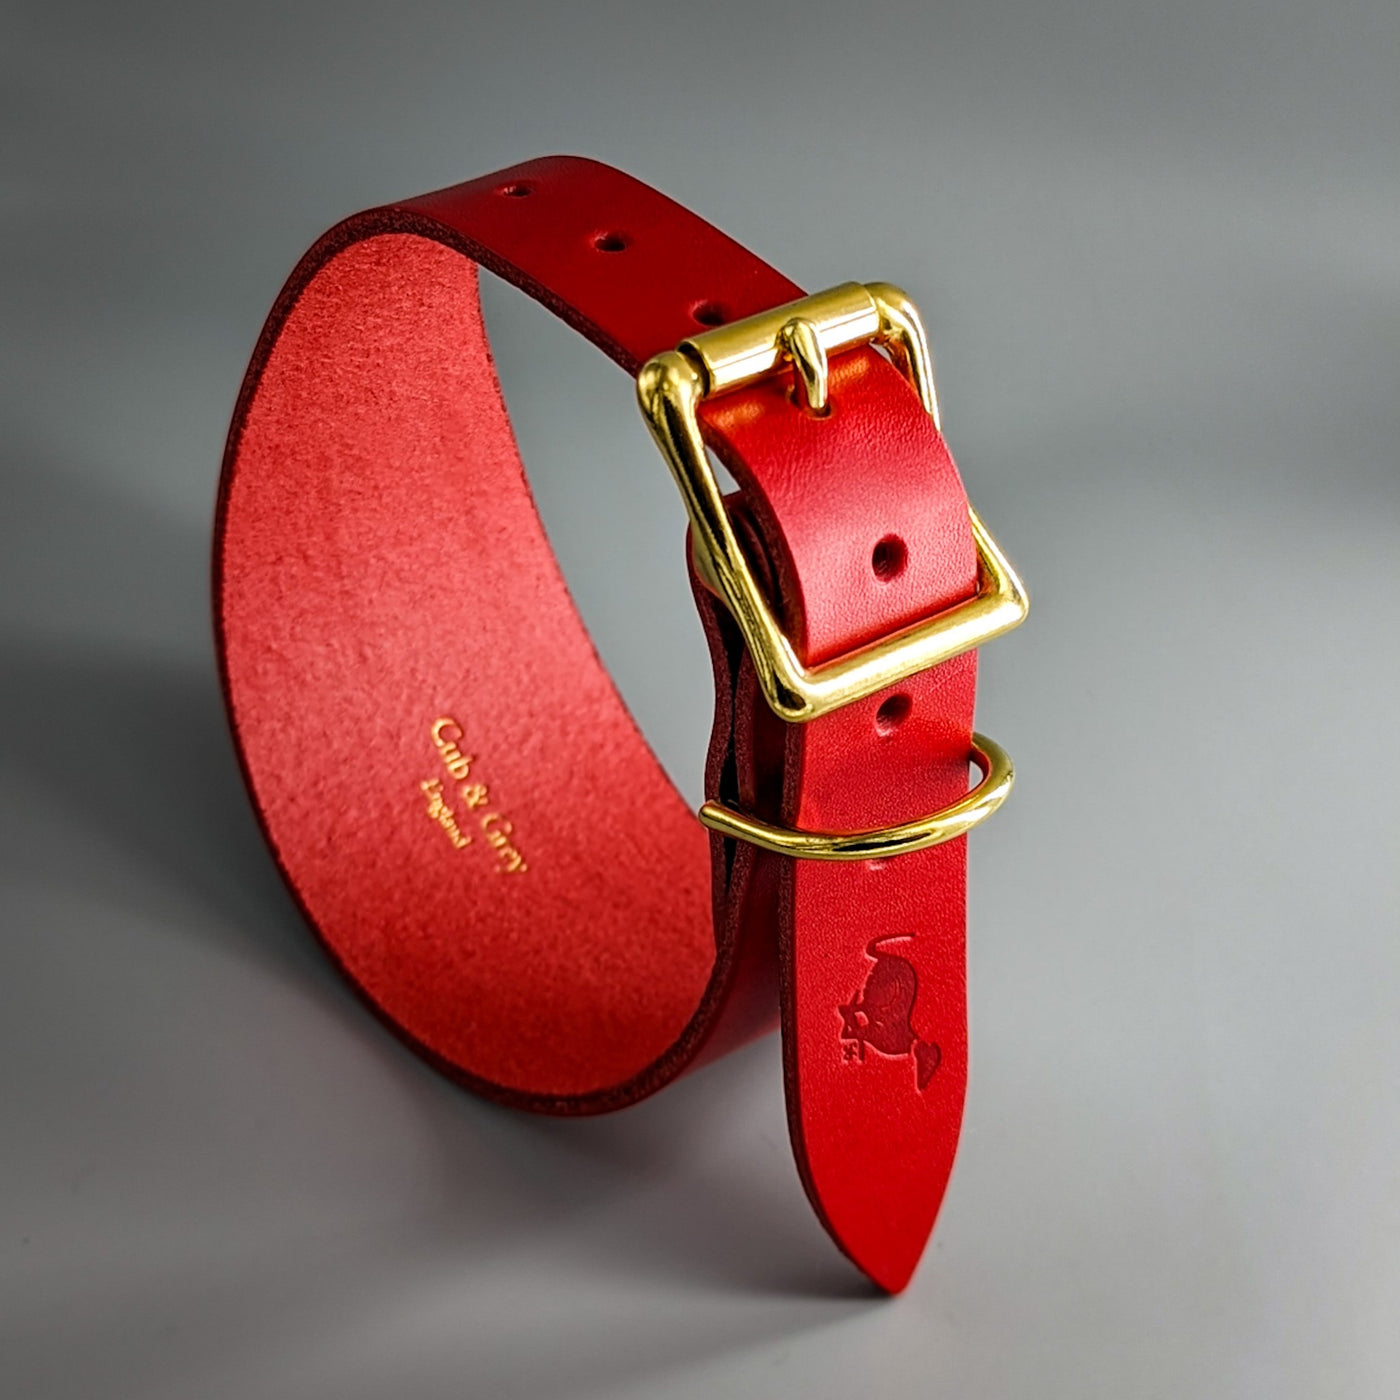 Moriarty Leather Hound Collar in Cavendish Red